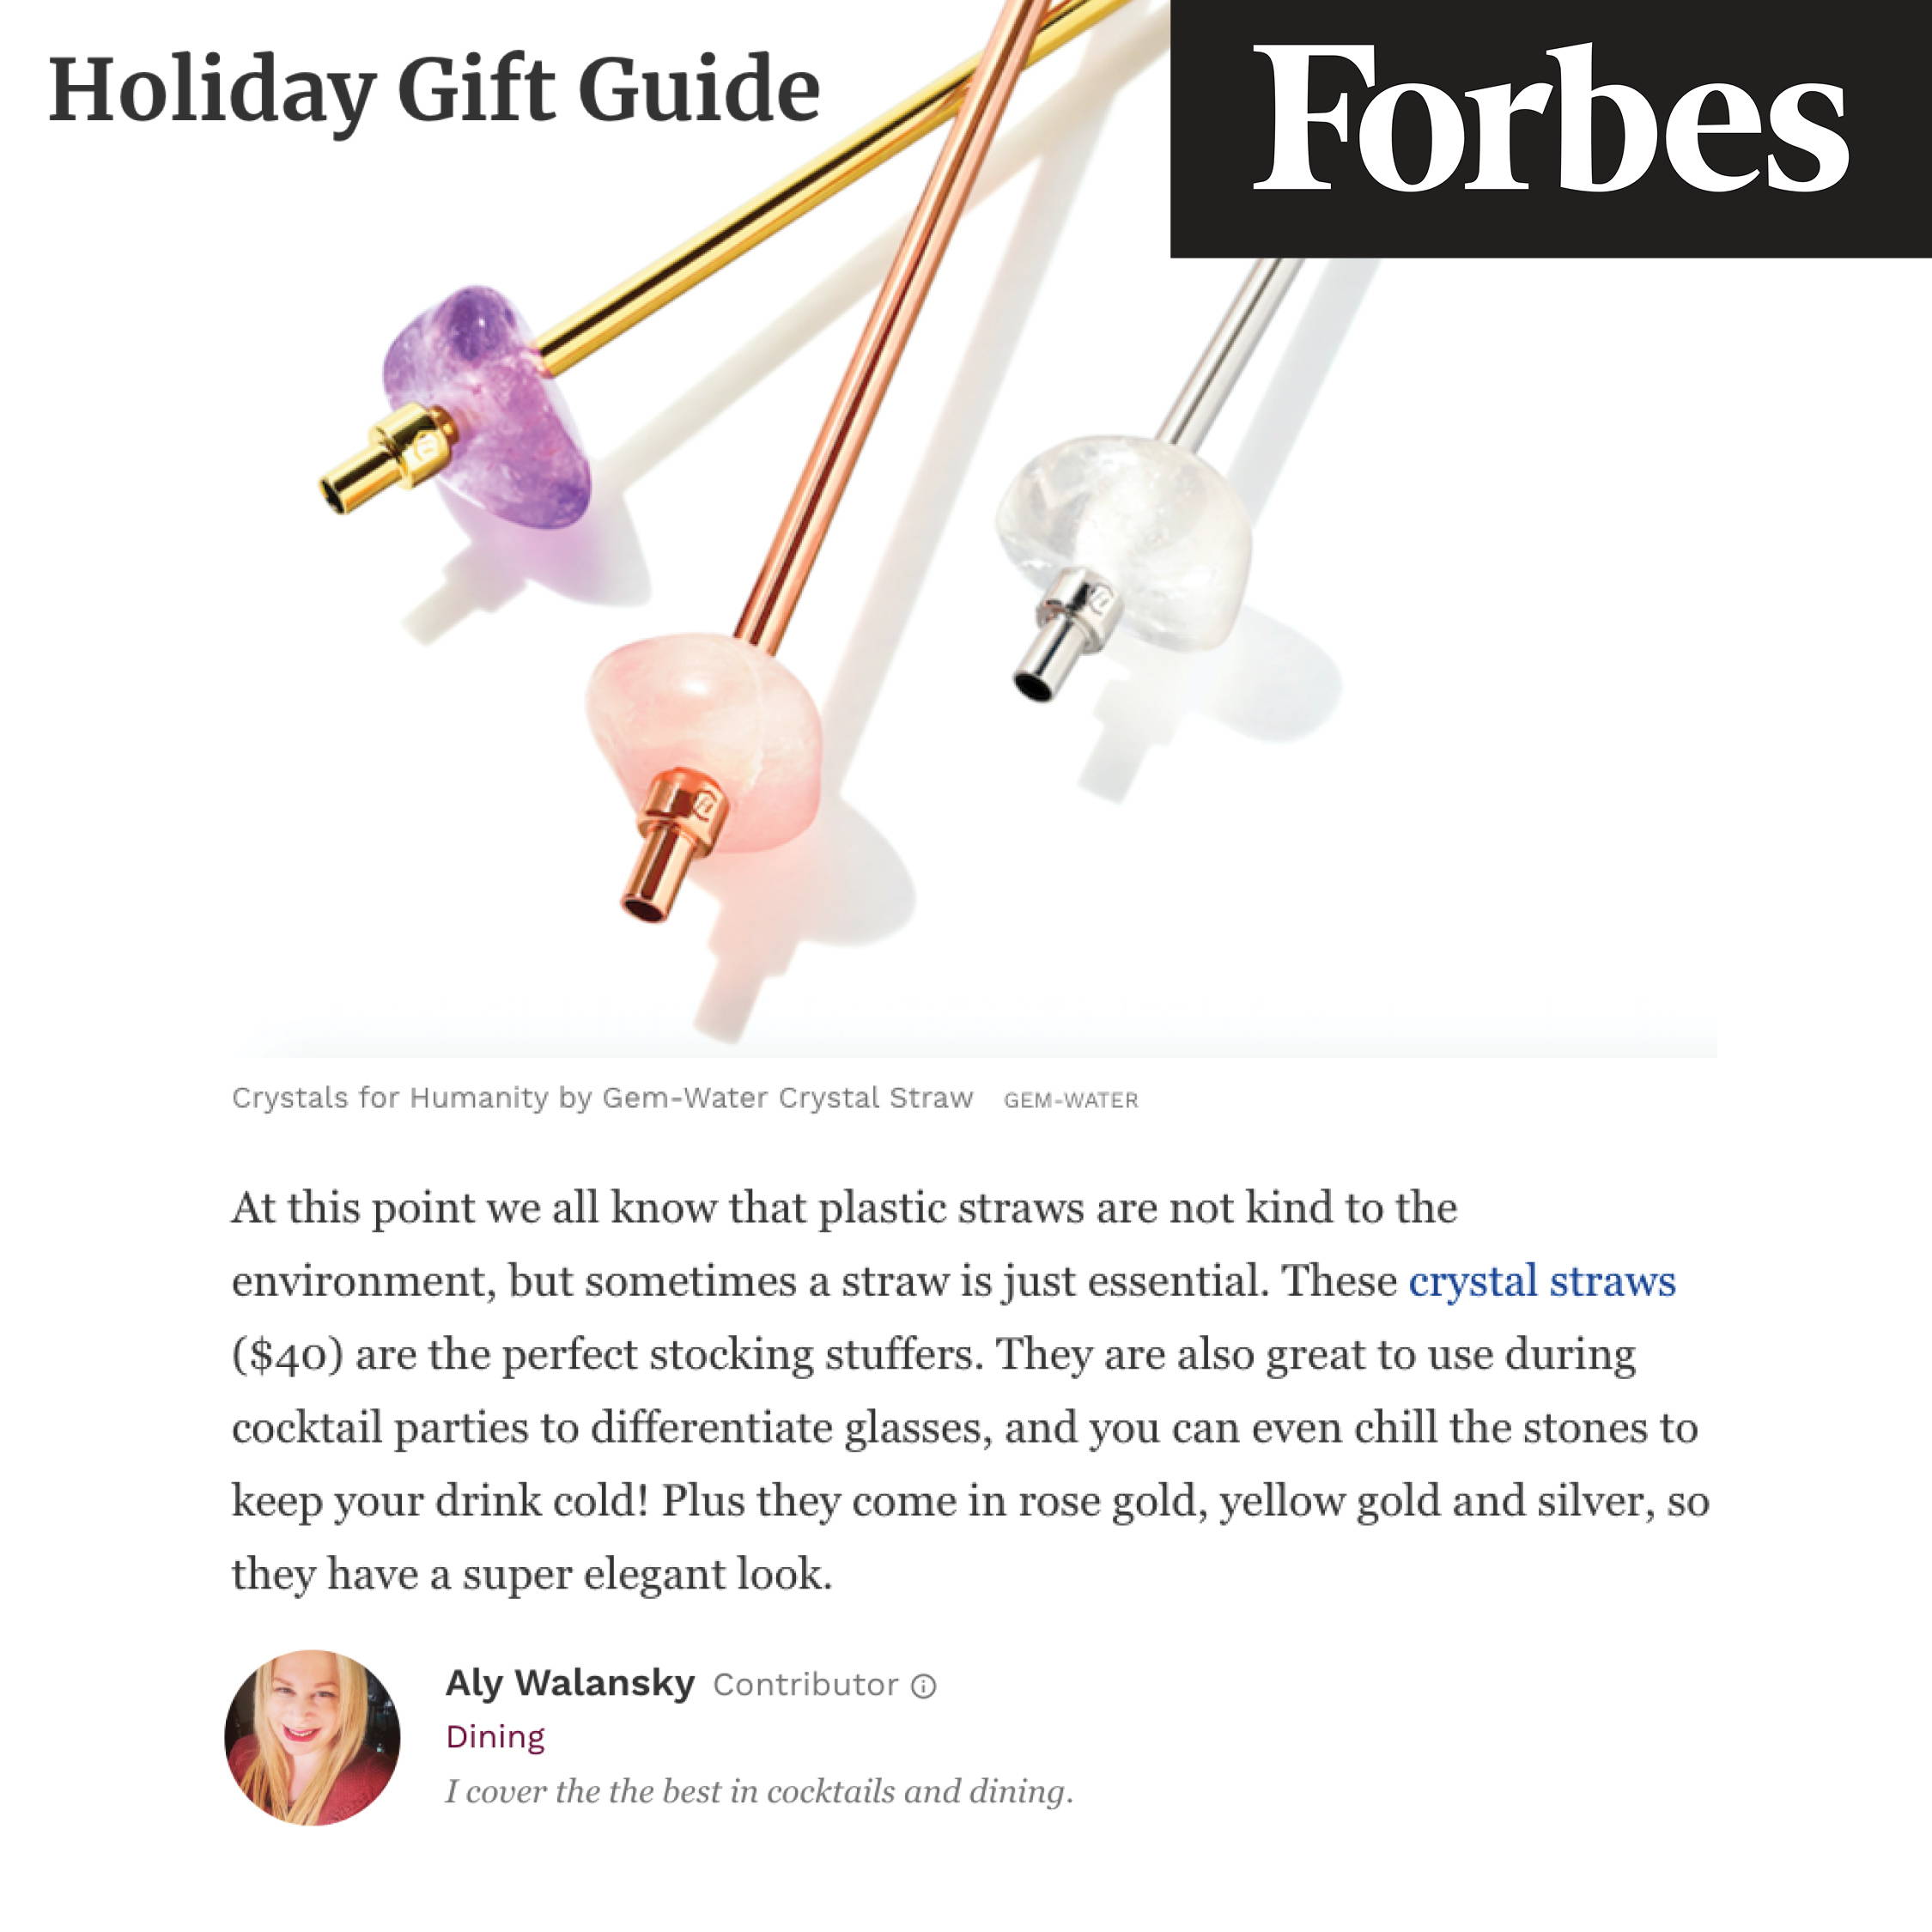 Forbes Holiday Gift Guide 2019: Best Gifts To Upgrade A Home Bar